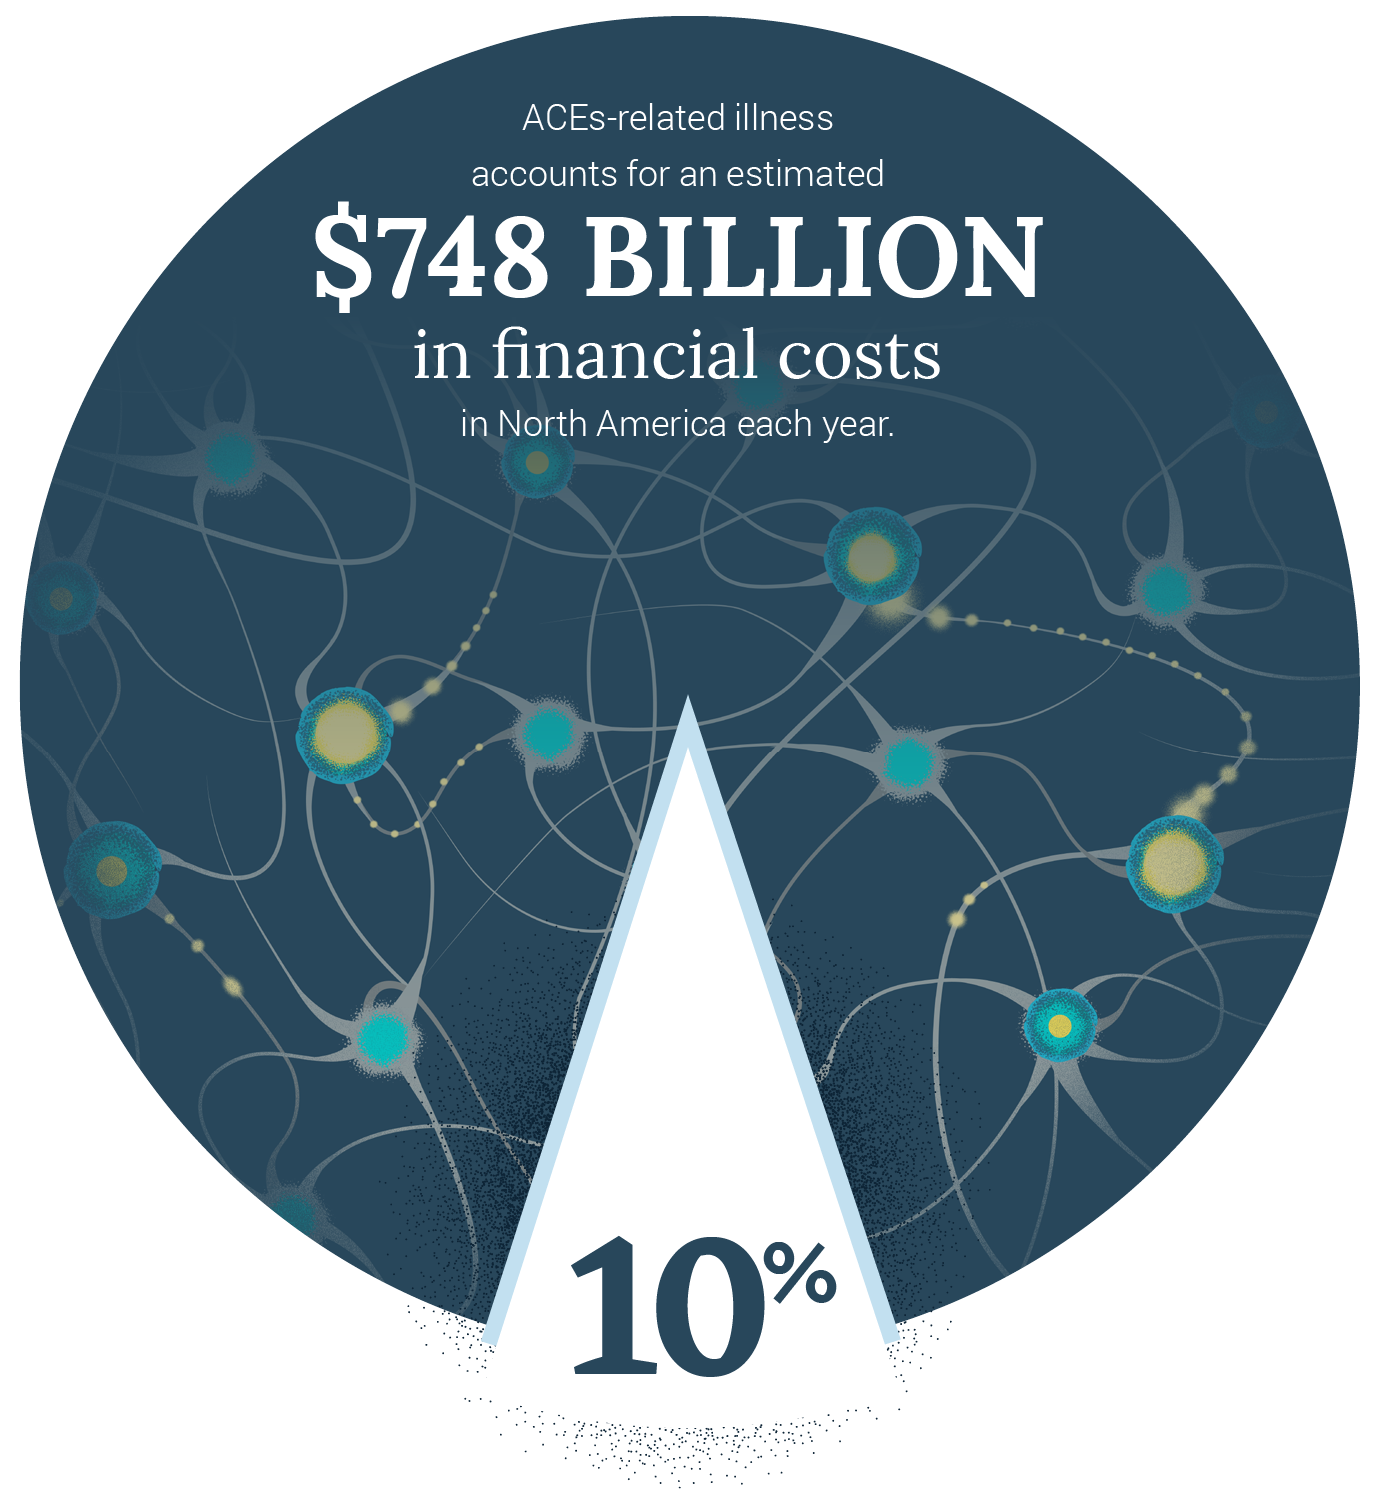 ACEs-related illness accounts for an estimated $748 Billion in financial costs in North America each year. 10% reduction in ACEs could equate to an annual savings of $56 billion.